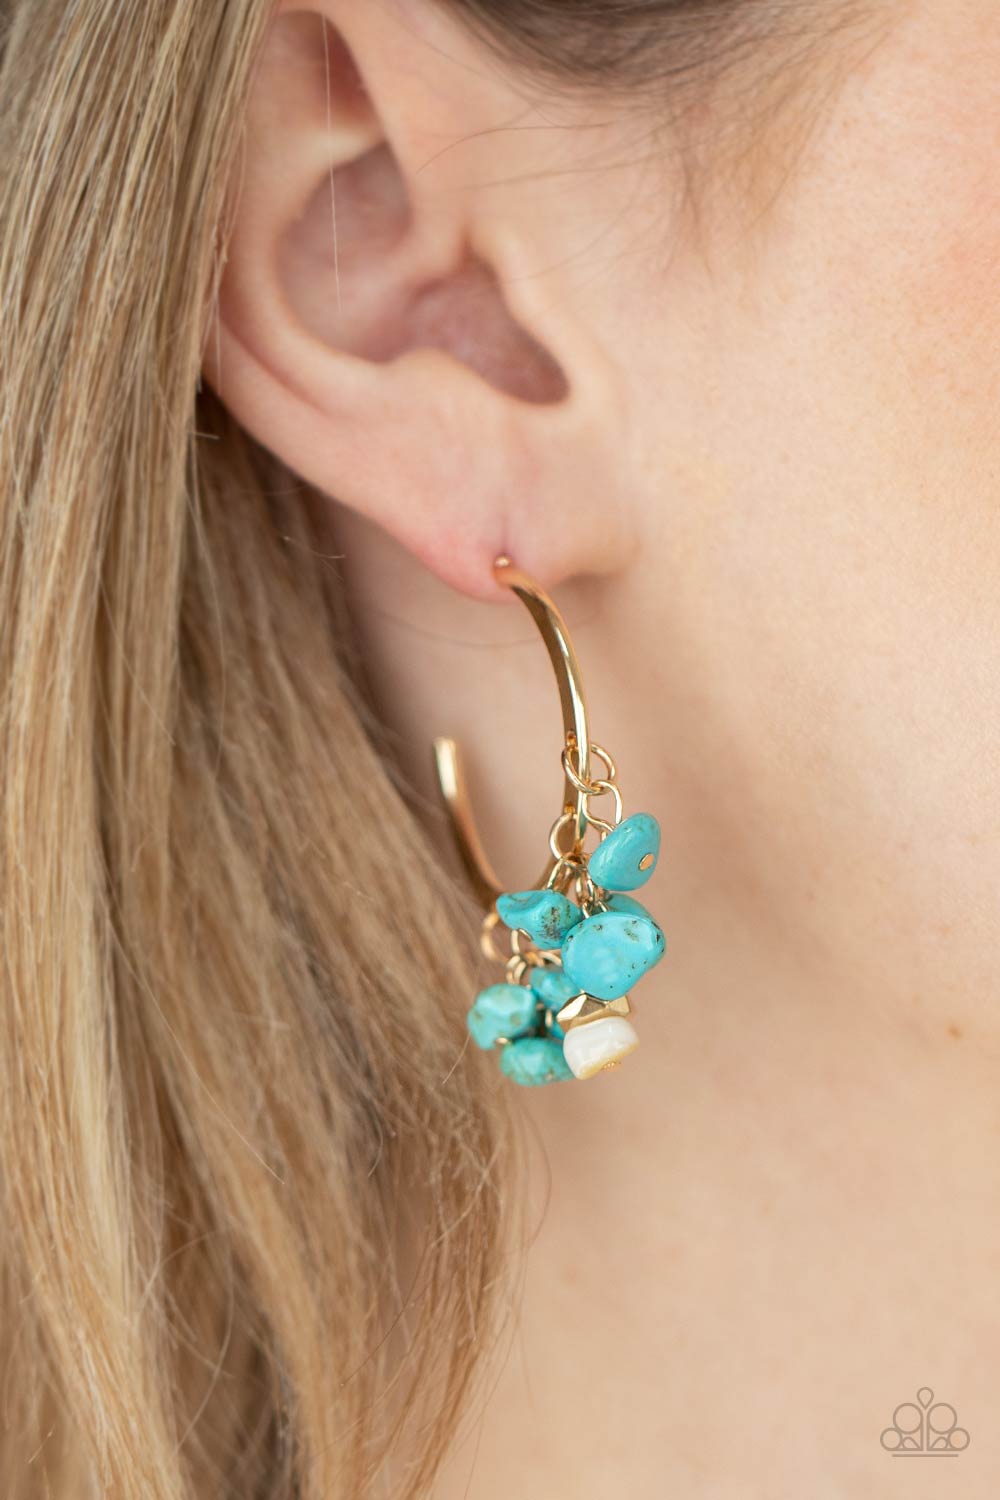 Gorgeously Grounding - Gold - Turquoise Hoop Earrings - Paparazzi Accessories - 
Clusters of turquoise pebbles swing from the bottom of a dainty gold hoop, creating an earthy fringe. A faceted gold and white stone bead swings from the center, adding an ethereal edge. Earring attaches to a standard post fitting. Hoop measures approximately 1 1/4" in diameter.
Sold as one pair of hoop earrings.
